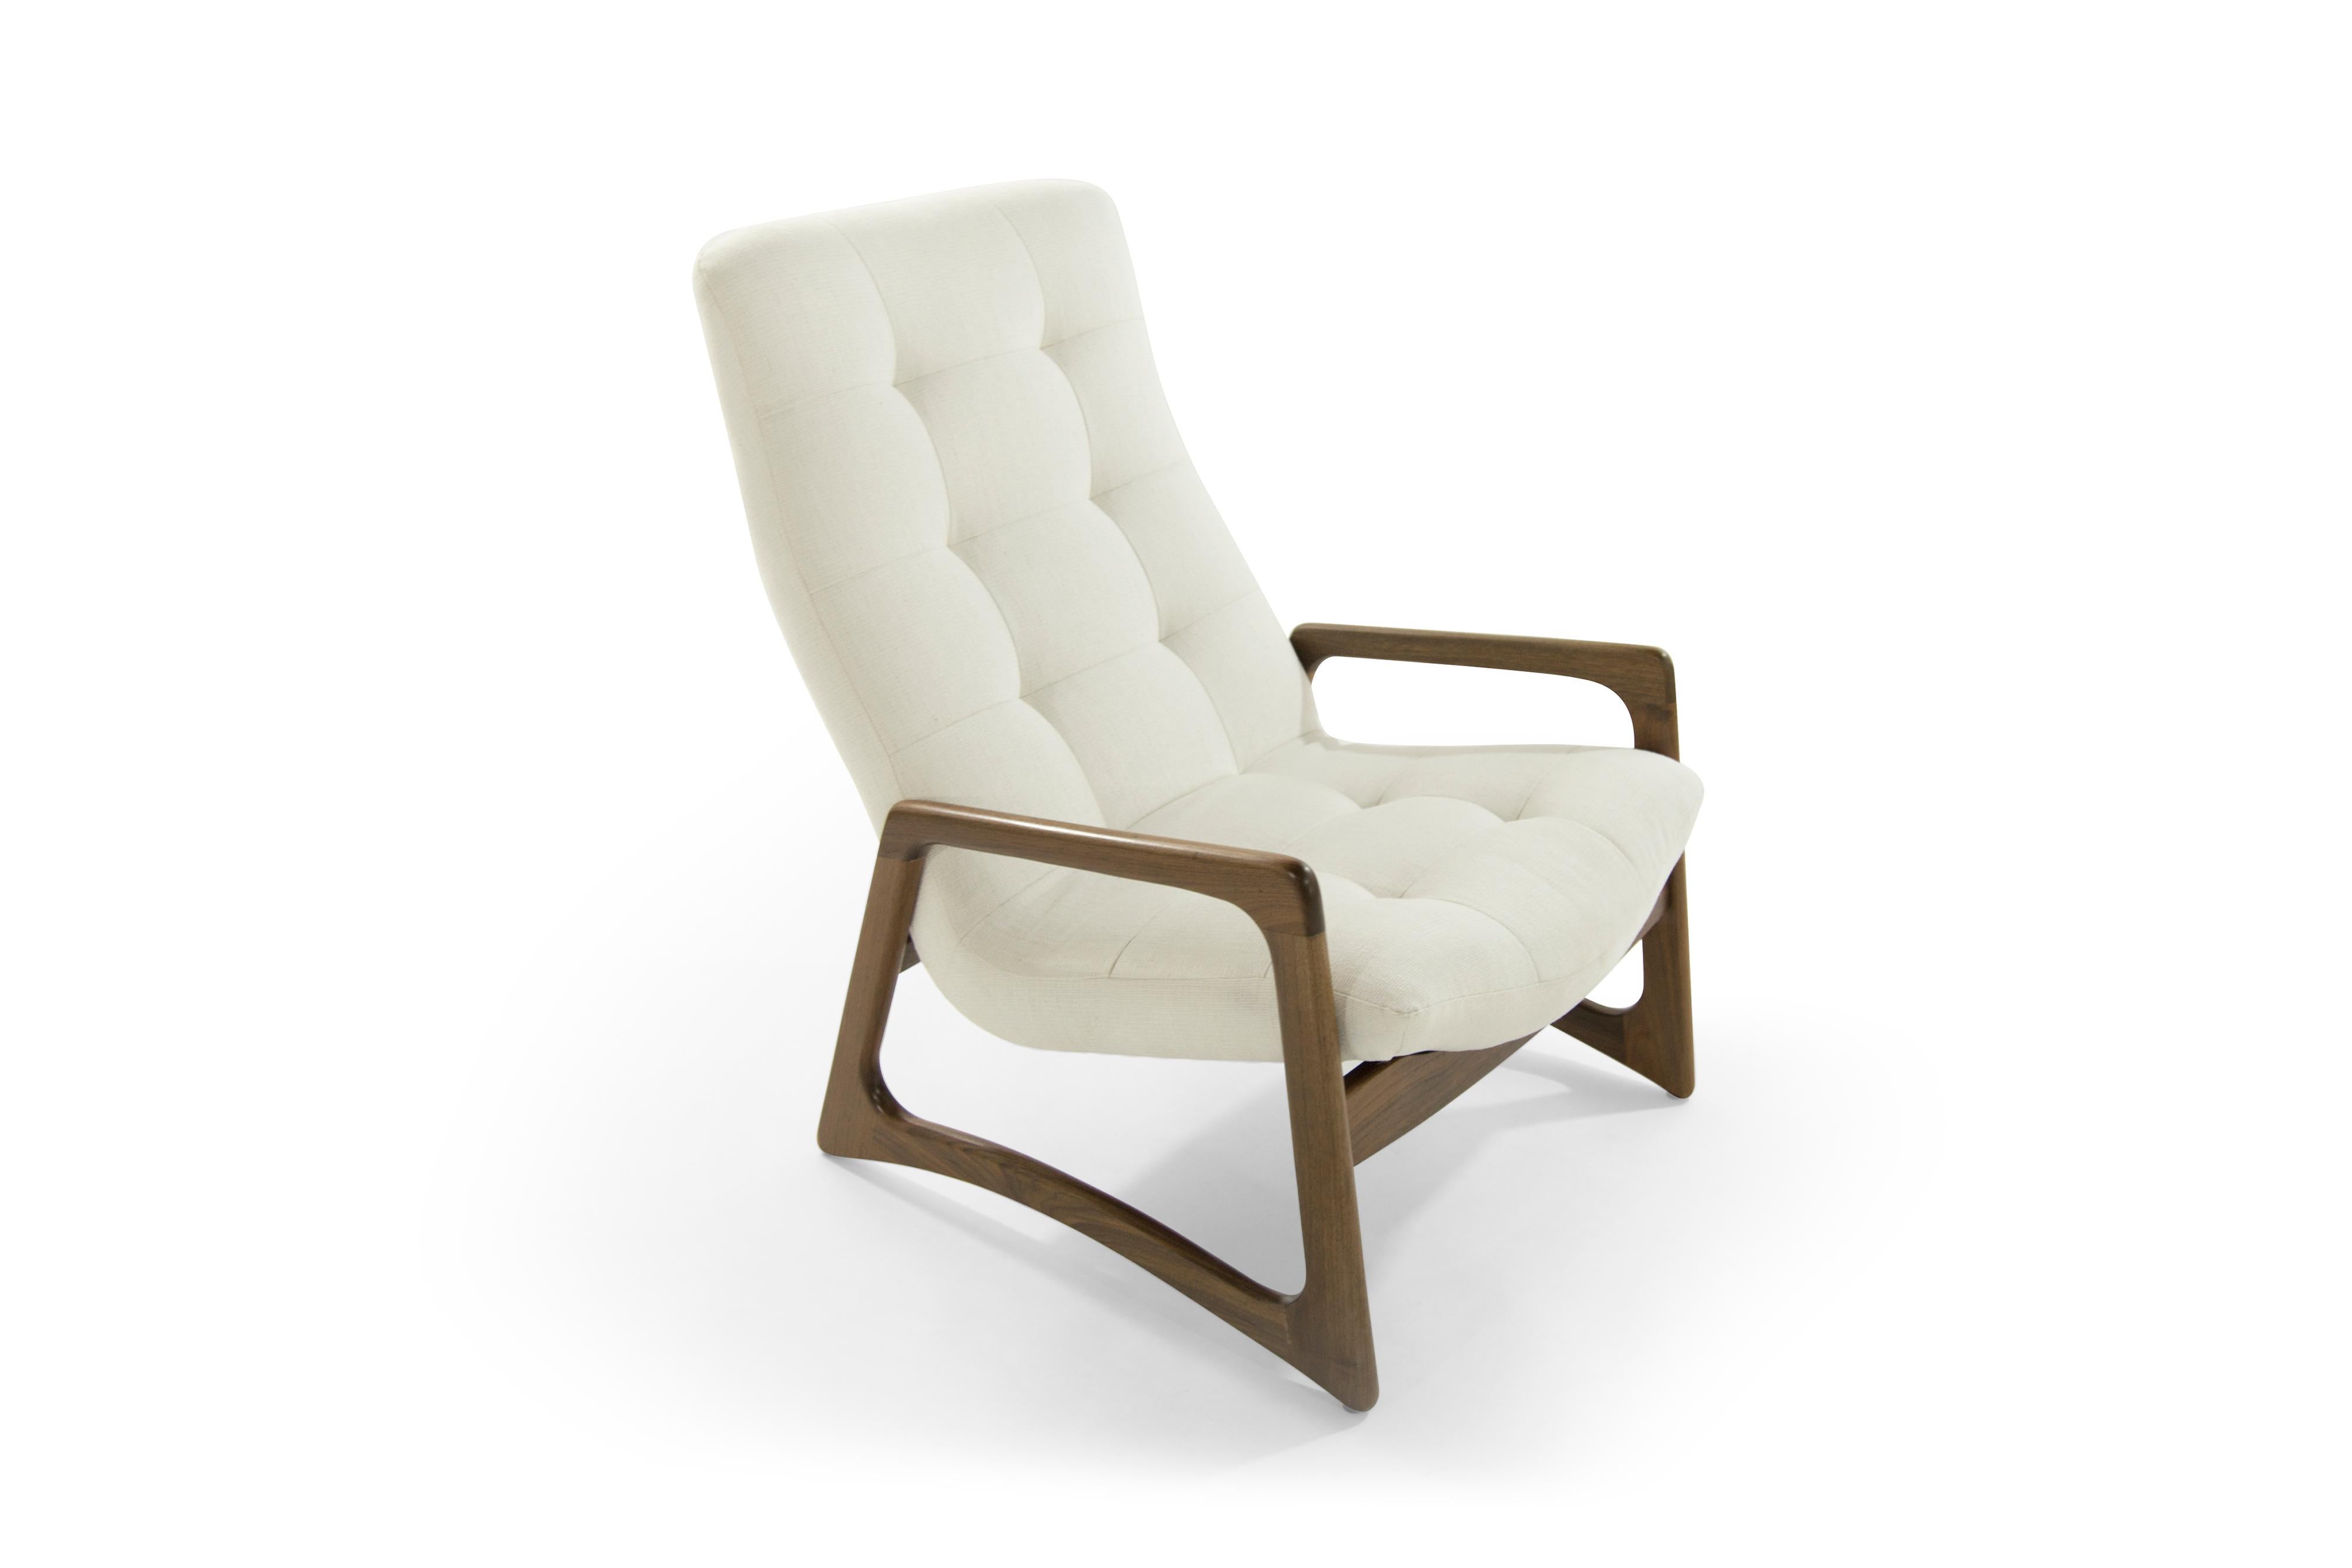 Twill Sculptural Walnut Lounge Chairs by Adrian Pearsall for Craft Associates